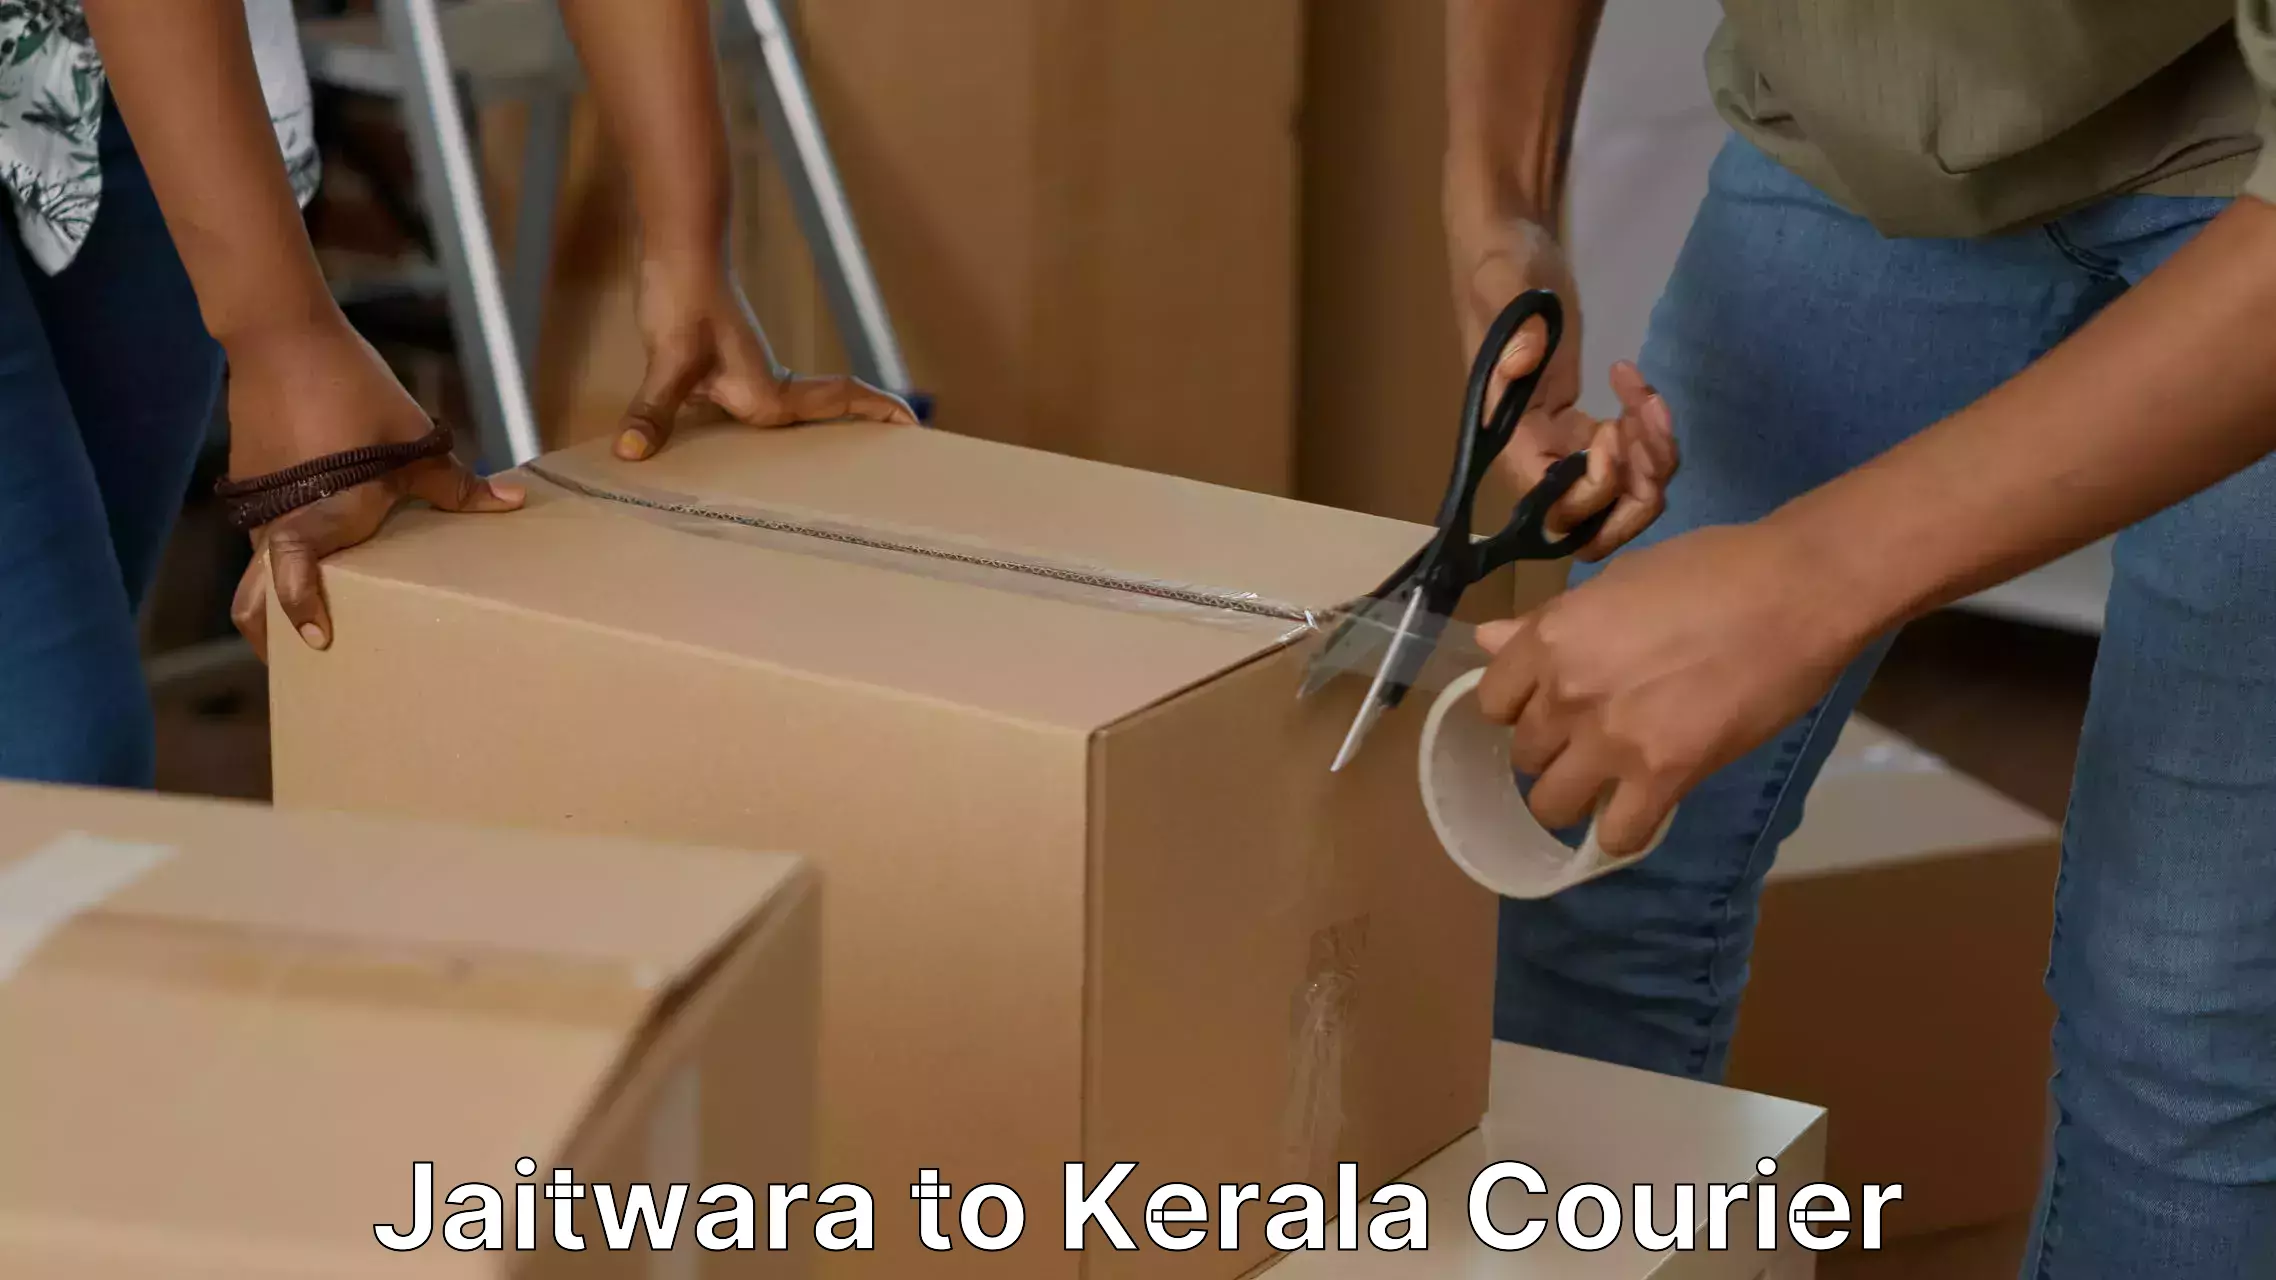 Professional movers and packers Jaitwara to Kozhikode